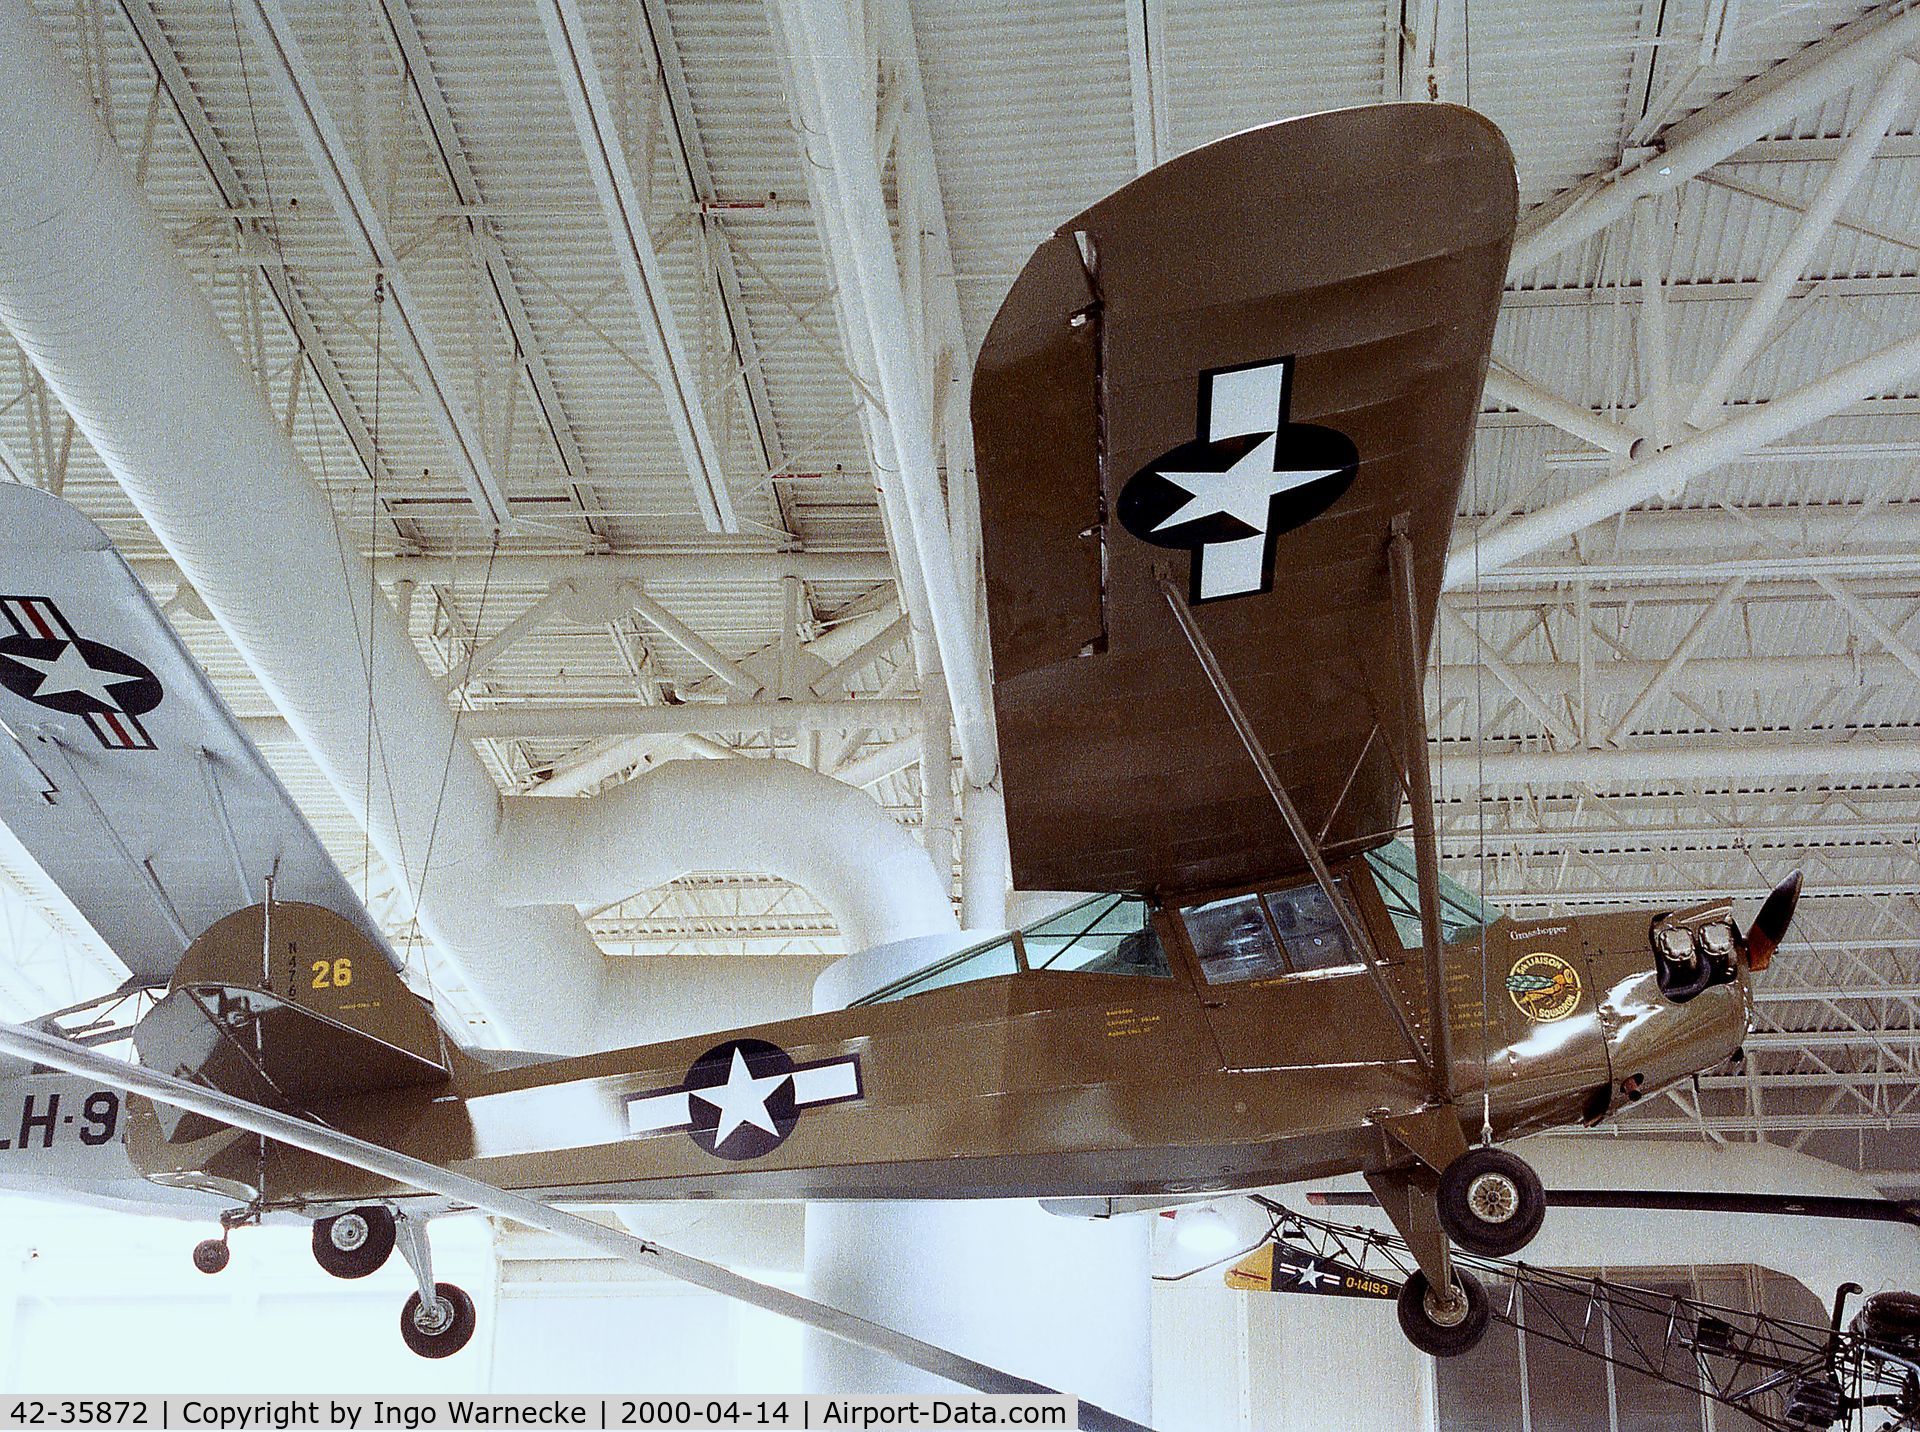 42-35872, 1942 Taylorcraft L-2A Grasshopper C/N 4333, Taylorcraft L-2A Grasshopper of the US Army Aviation at the Army Aviation Museum, Ft Rucker AL